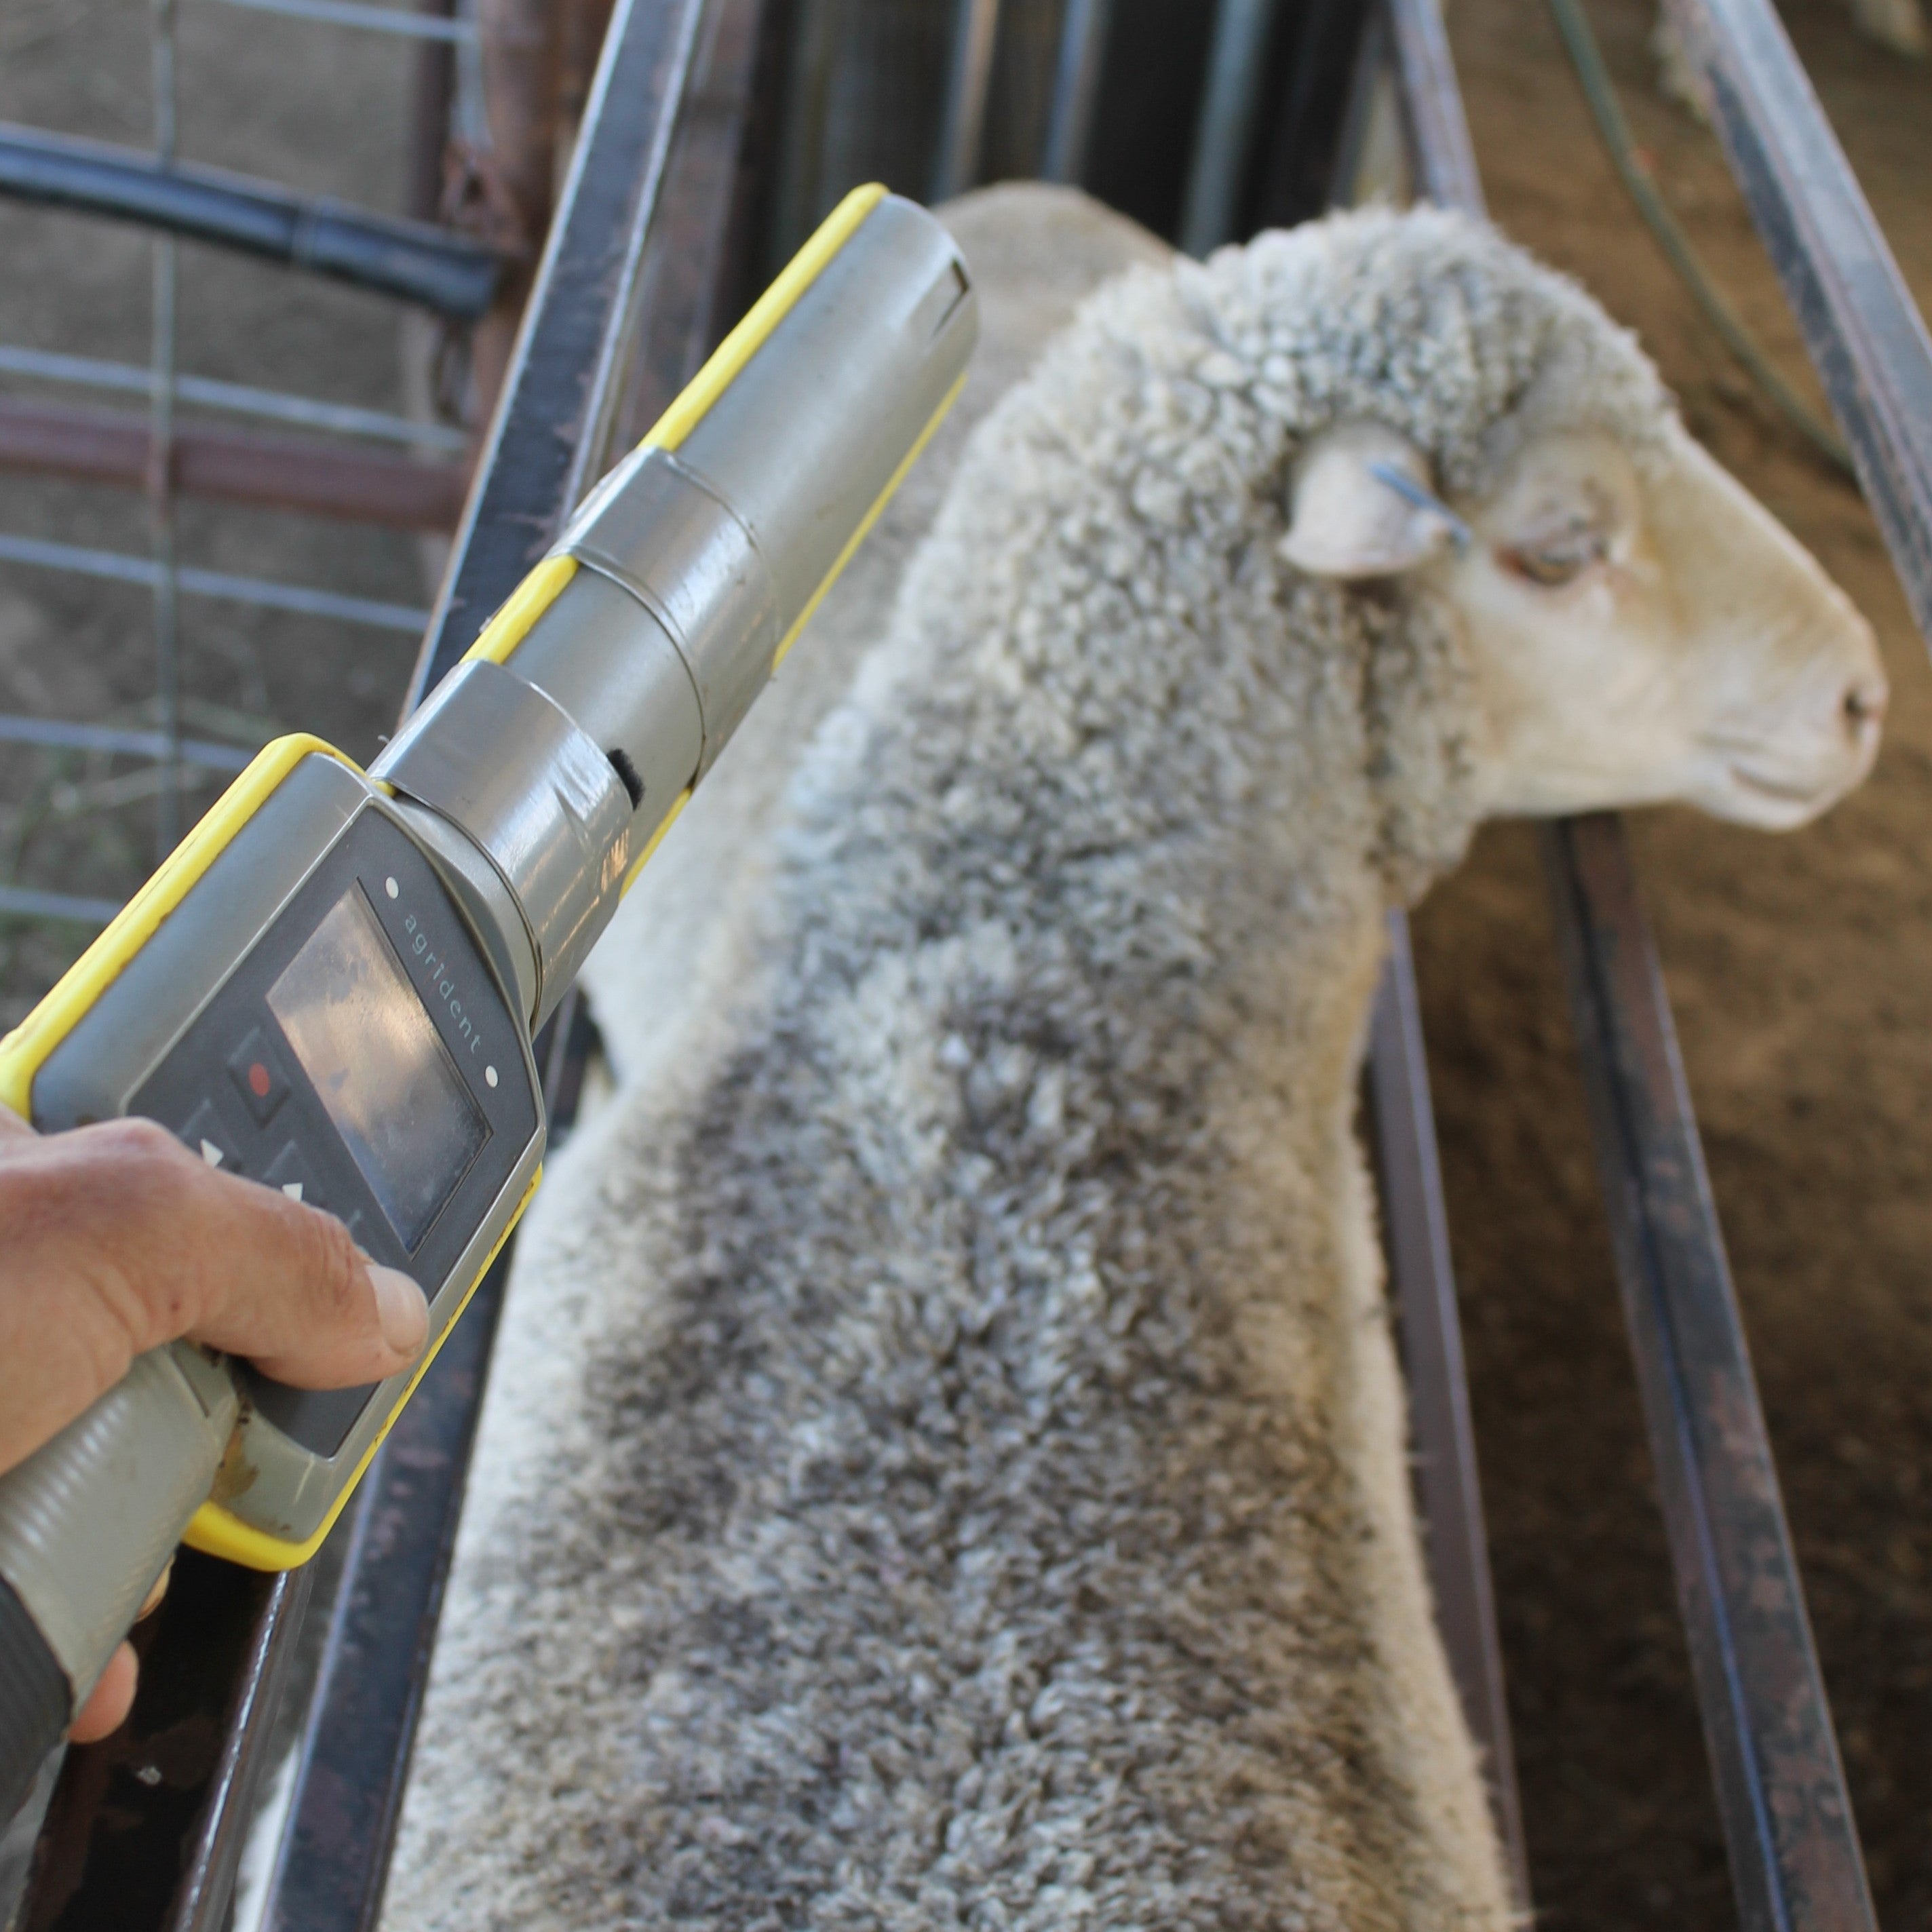 Scanning a sheep eartag